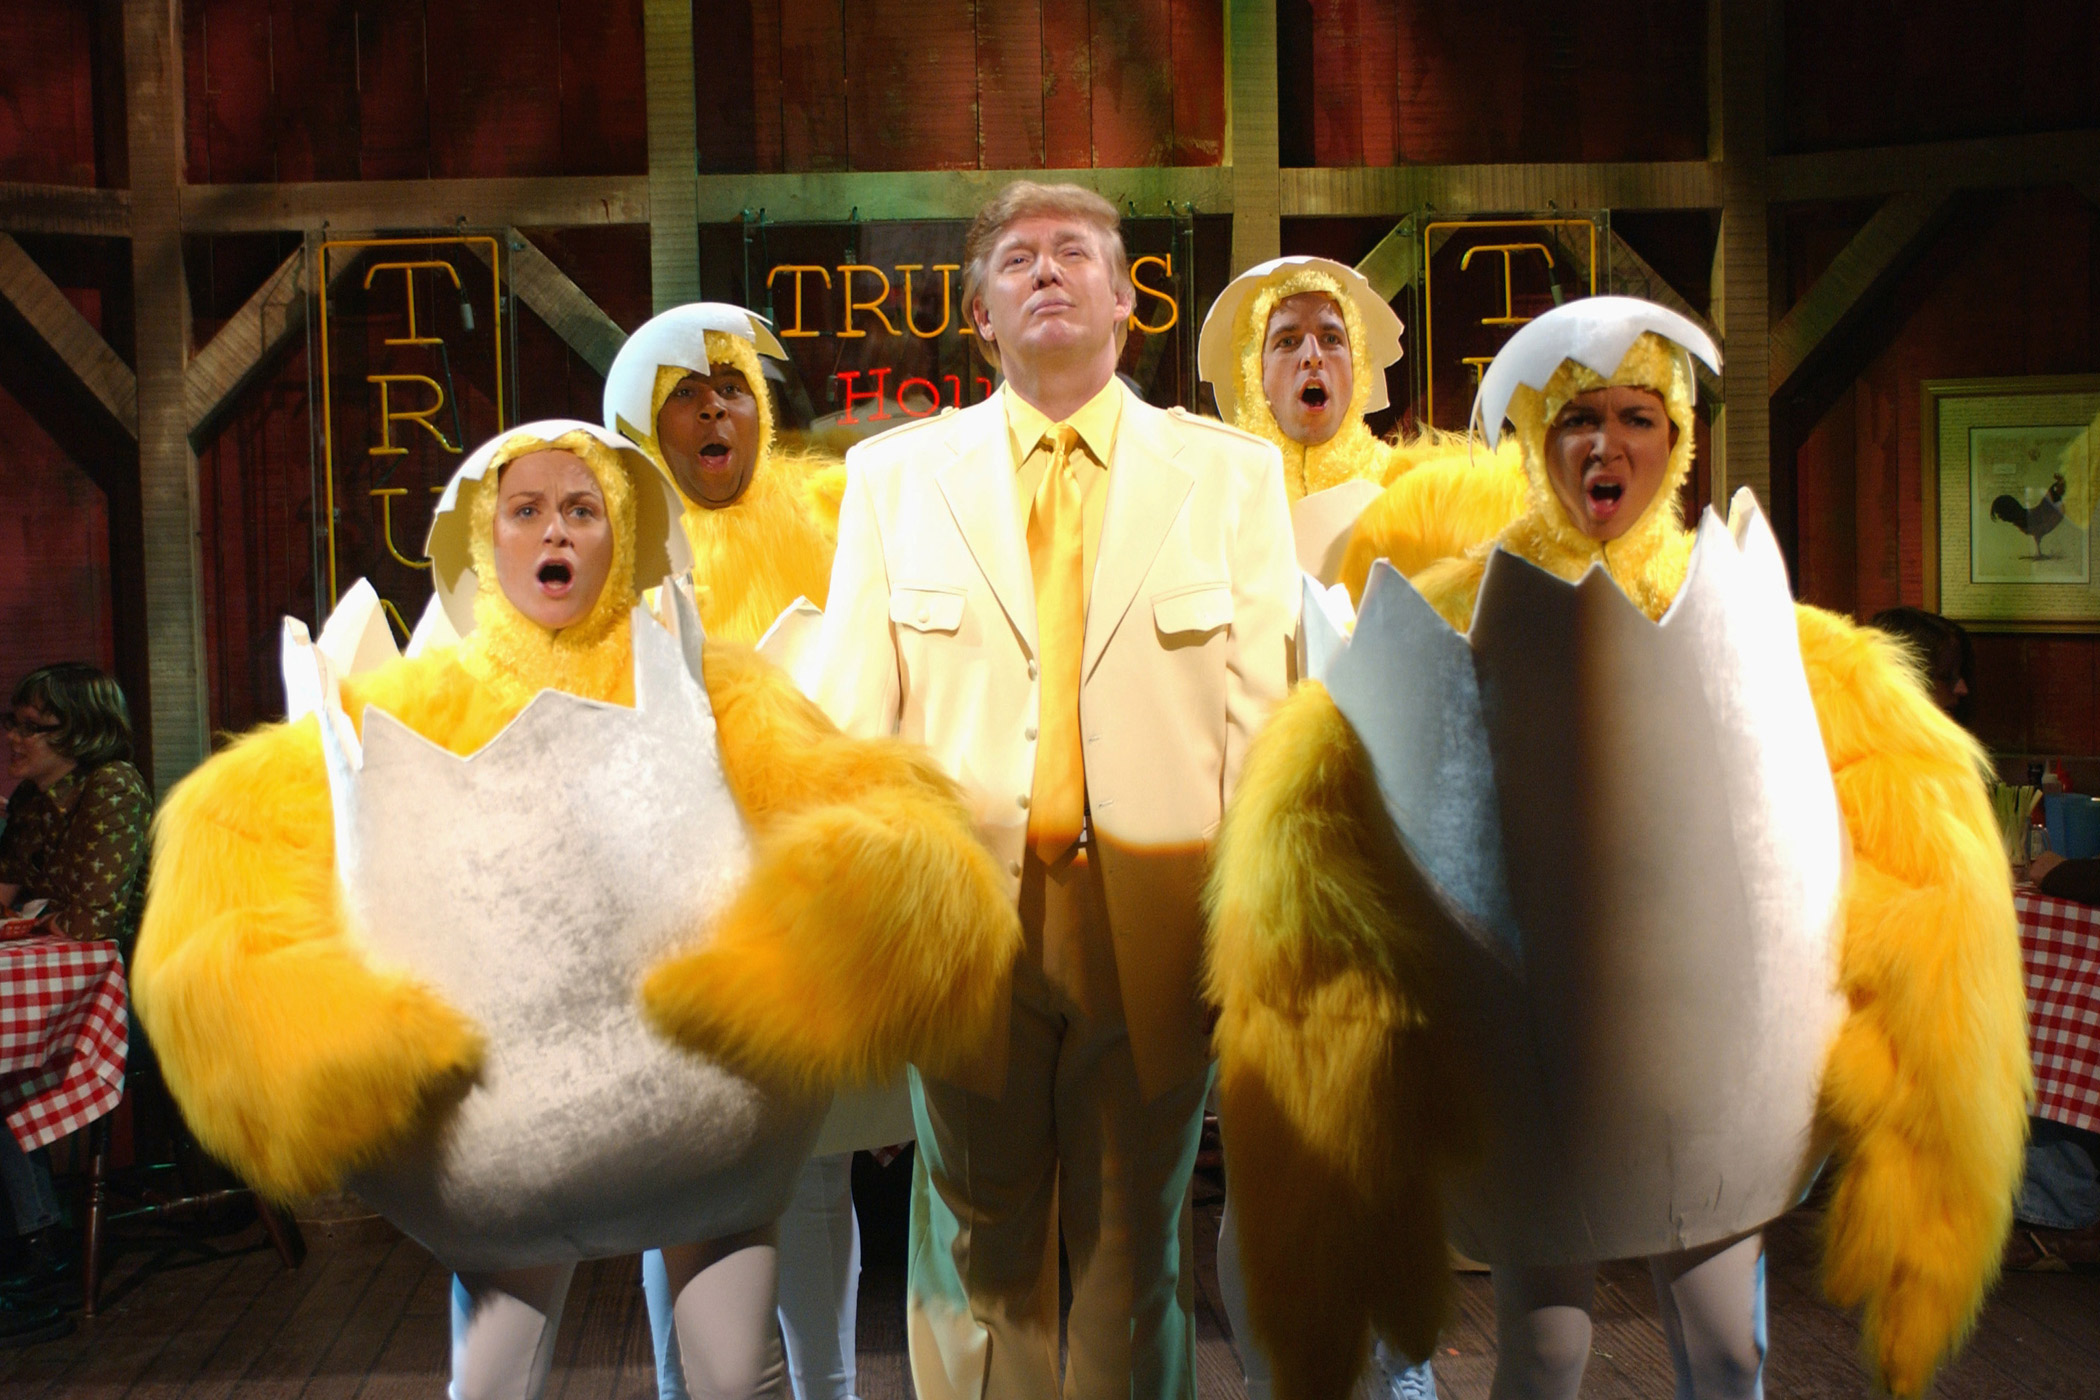 Donald Trump hosted 'Saturday Night Live' on April 3, 2004. He appeared in the 'Donald Trump's House of Wings' sketch with Amy Poehler, Kenan Thompson, Seth Meyers and Maya Rudolph.